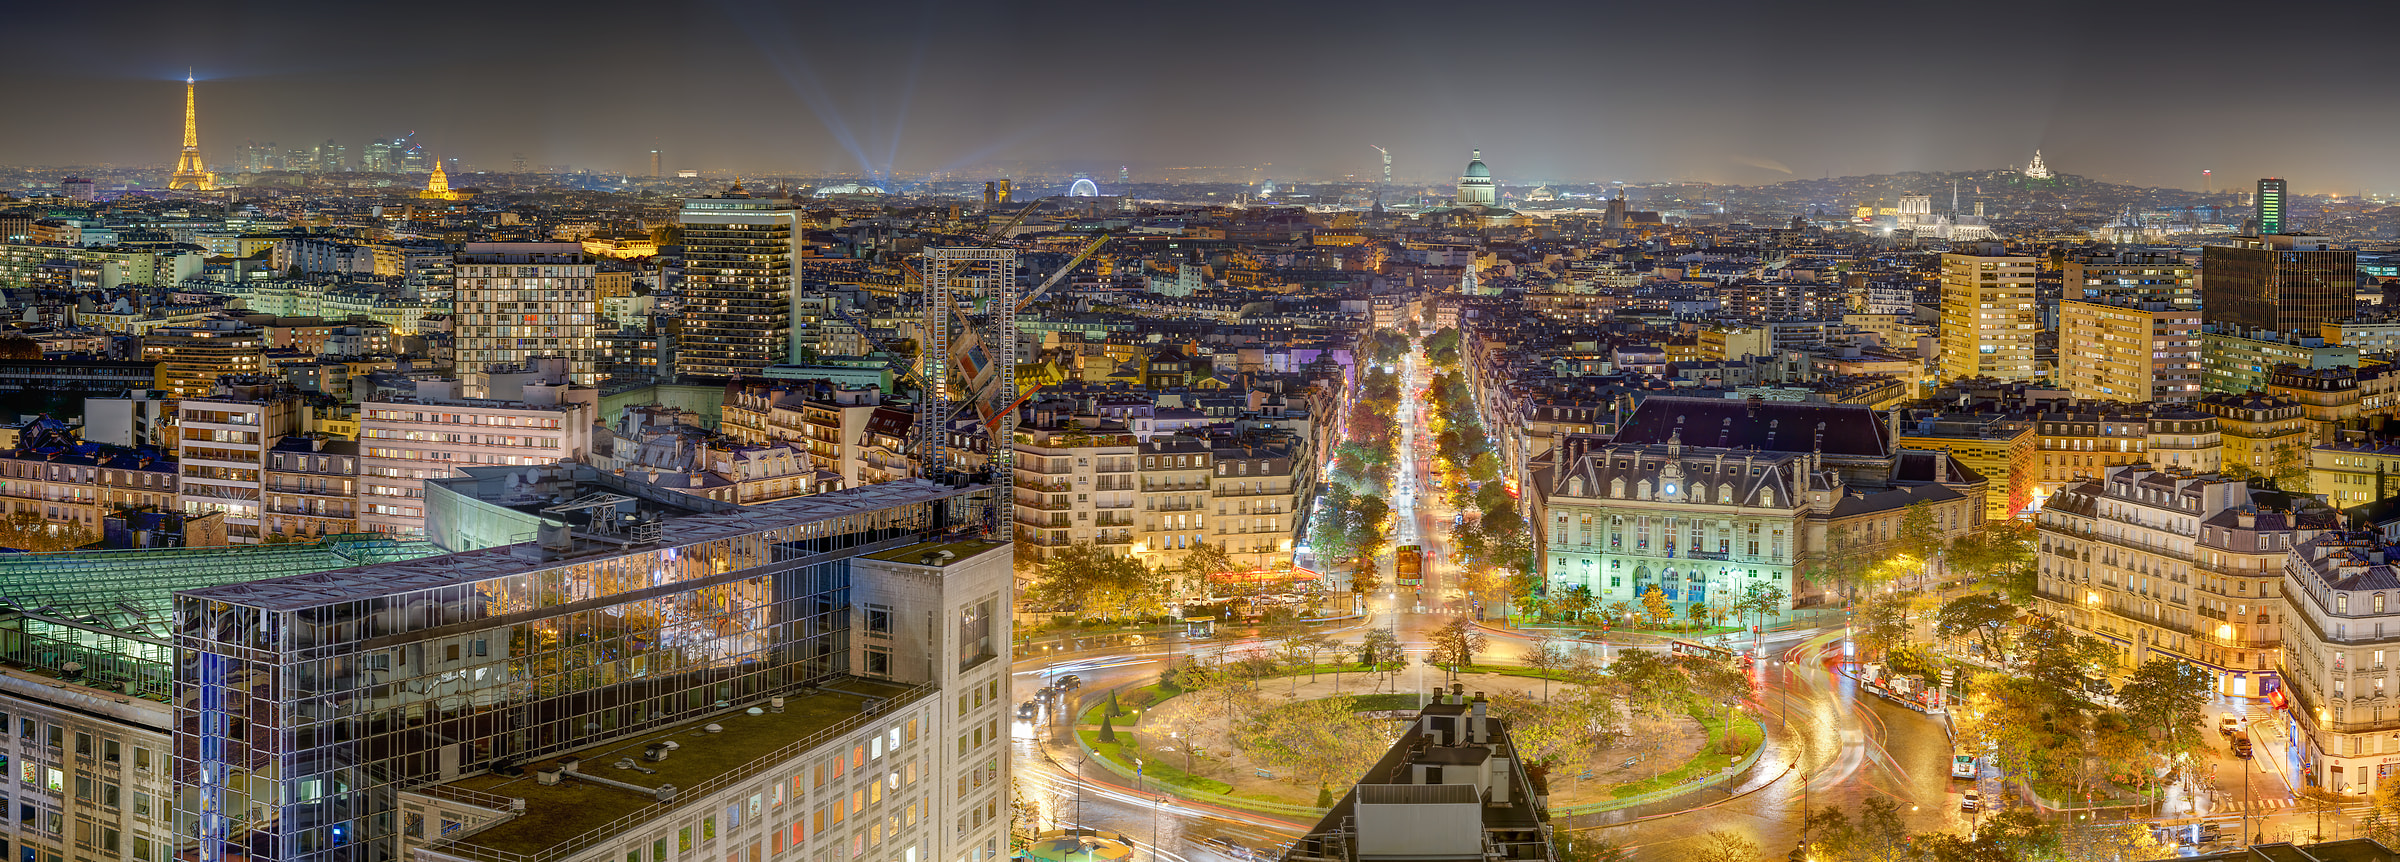 440 megapixels! A very high resolution, large-format VAST photo print of the Paris skyline at night with many famous French landmarks including the Eiffel Tower, Notre Dame, Sacré-Cœur; cityscape photograph created by Tim Lo Monaco in Place D'Italie, Paris, France